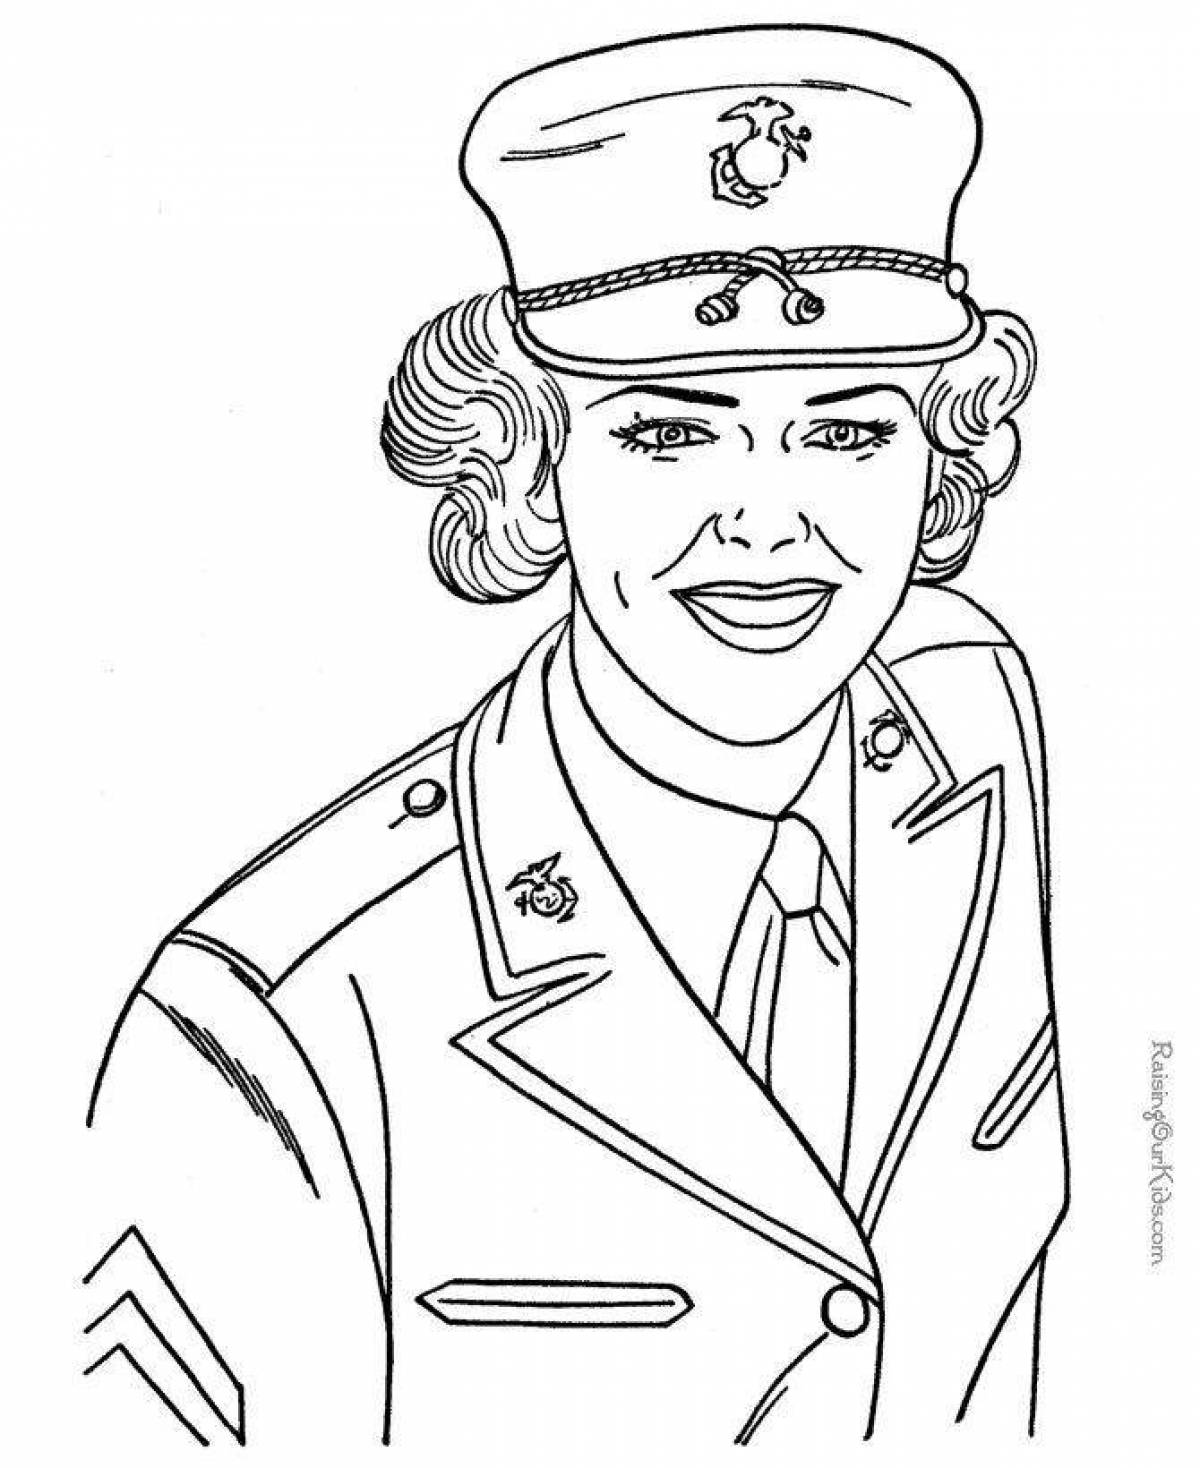 Military occupation shiny coloring book